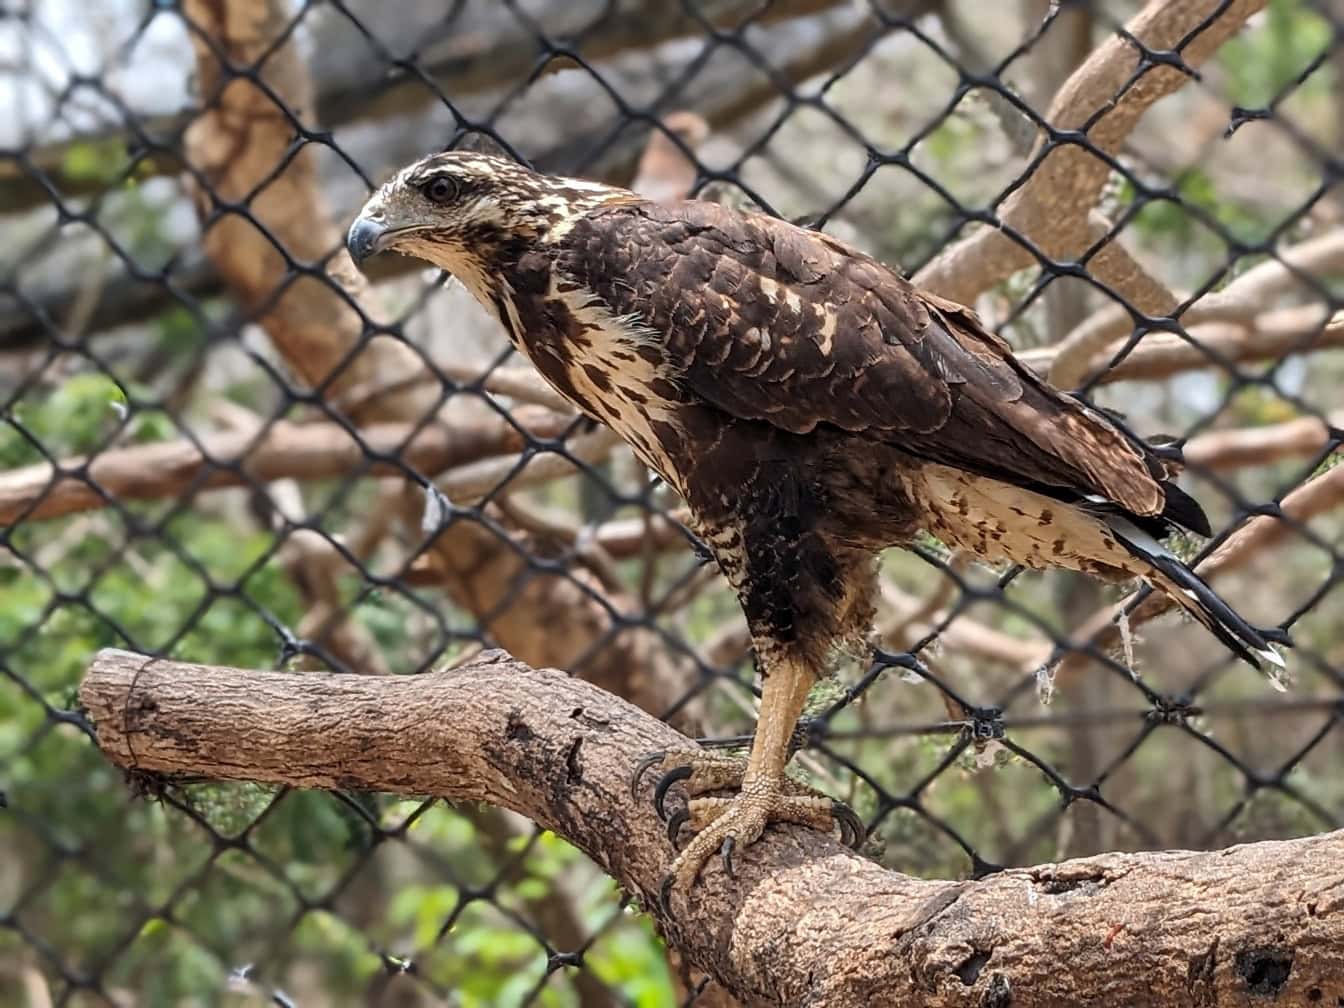 A bird of prey standing on a branch, a picture of a falcon in a zoo